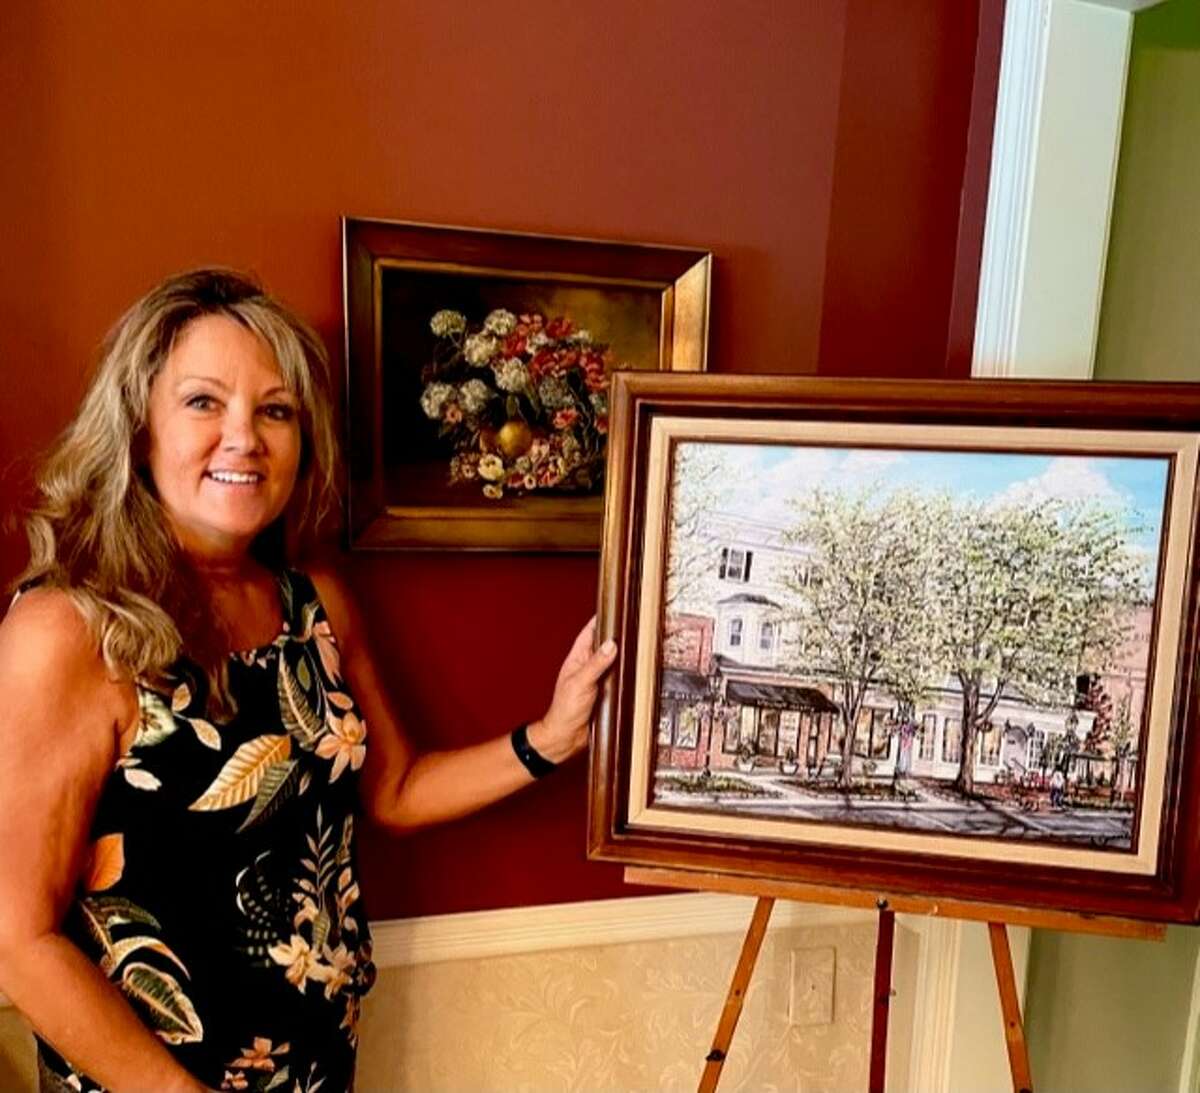 A 28-year resident of Ridgefield, Annie Caravelli has focused a lot of her artwork on creating Ridgefield-related paintings, such as the one in this photograph.